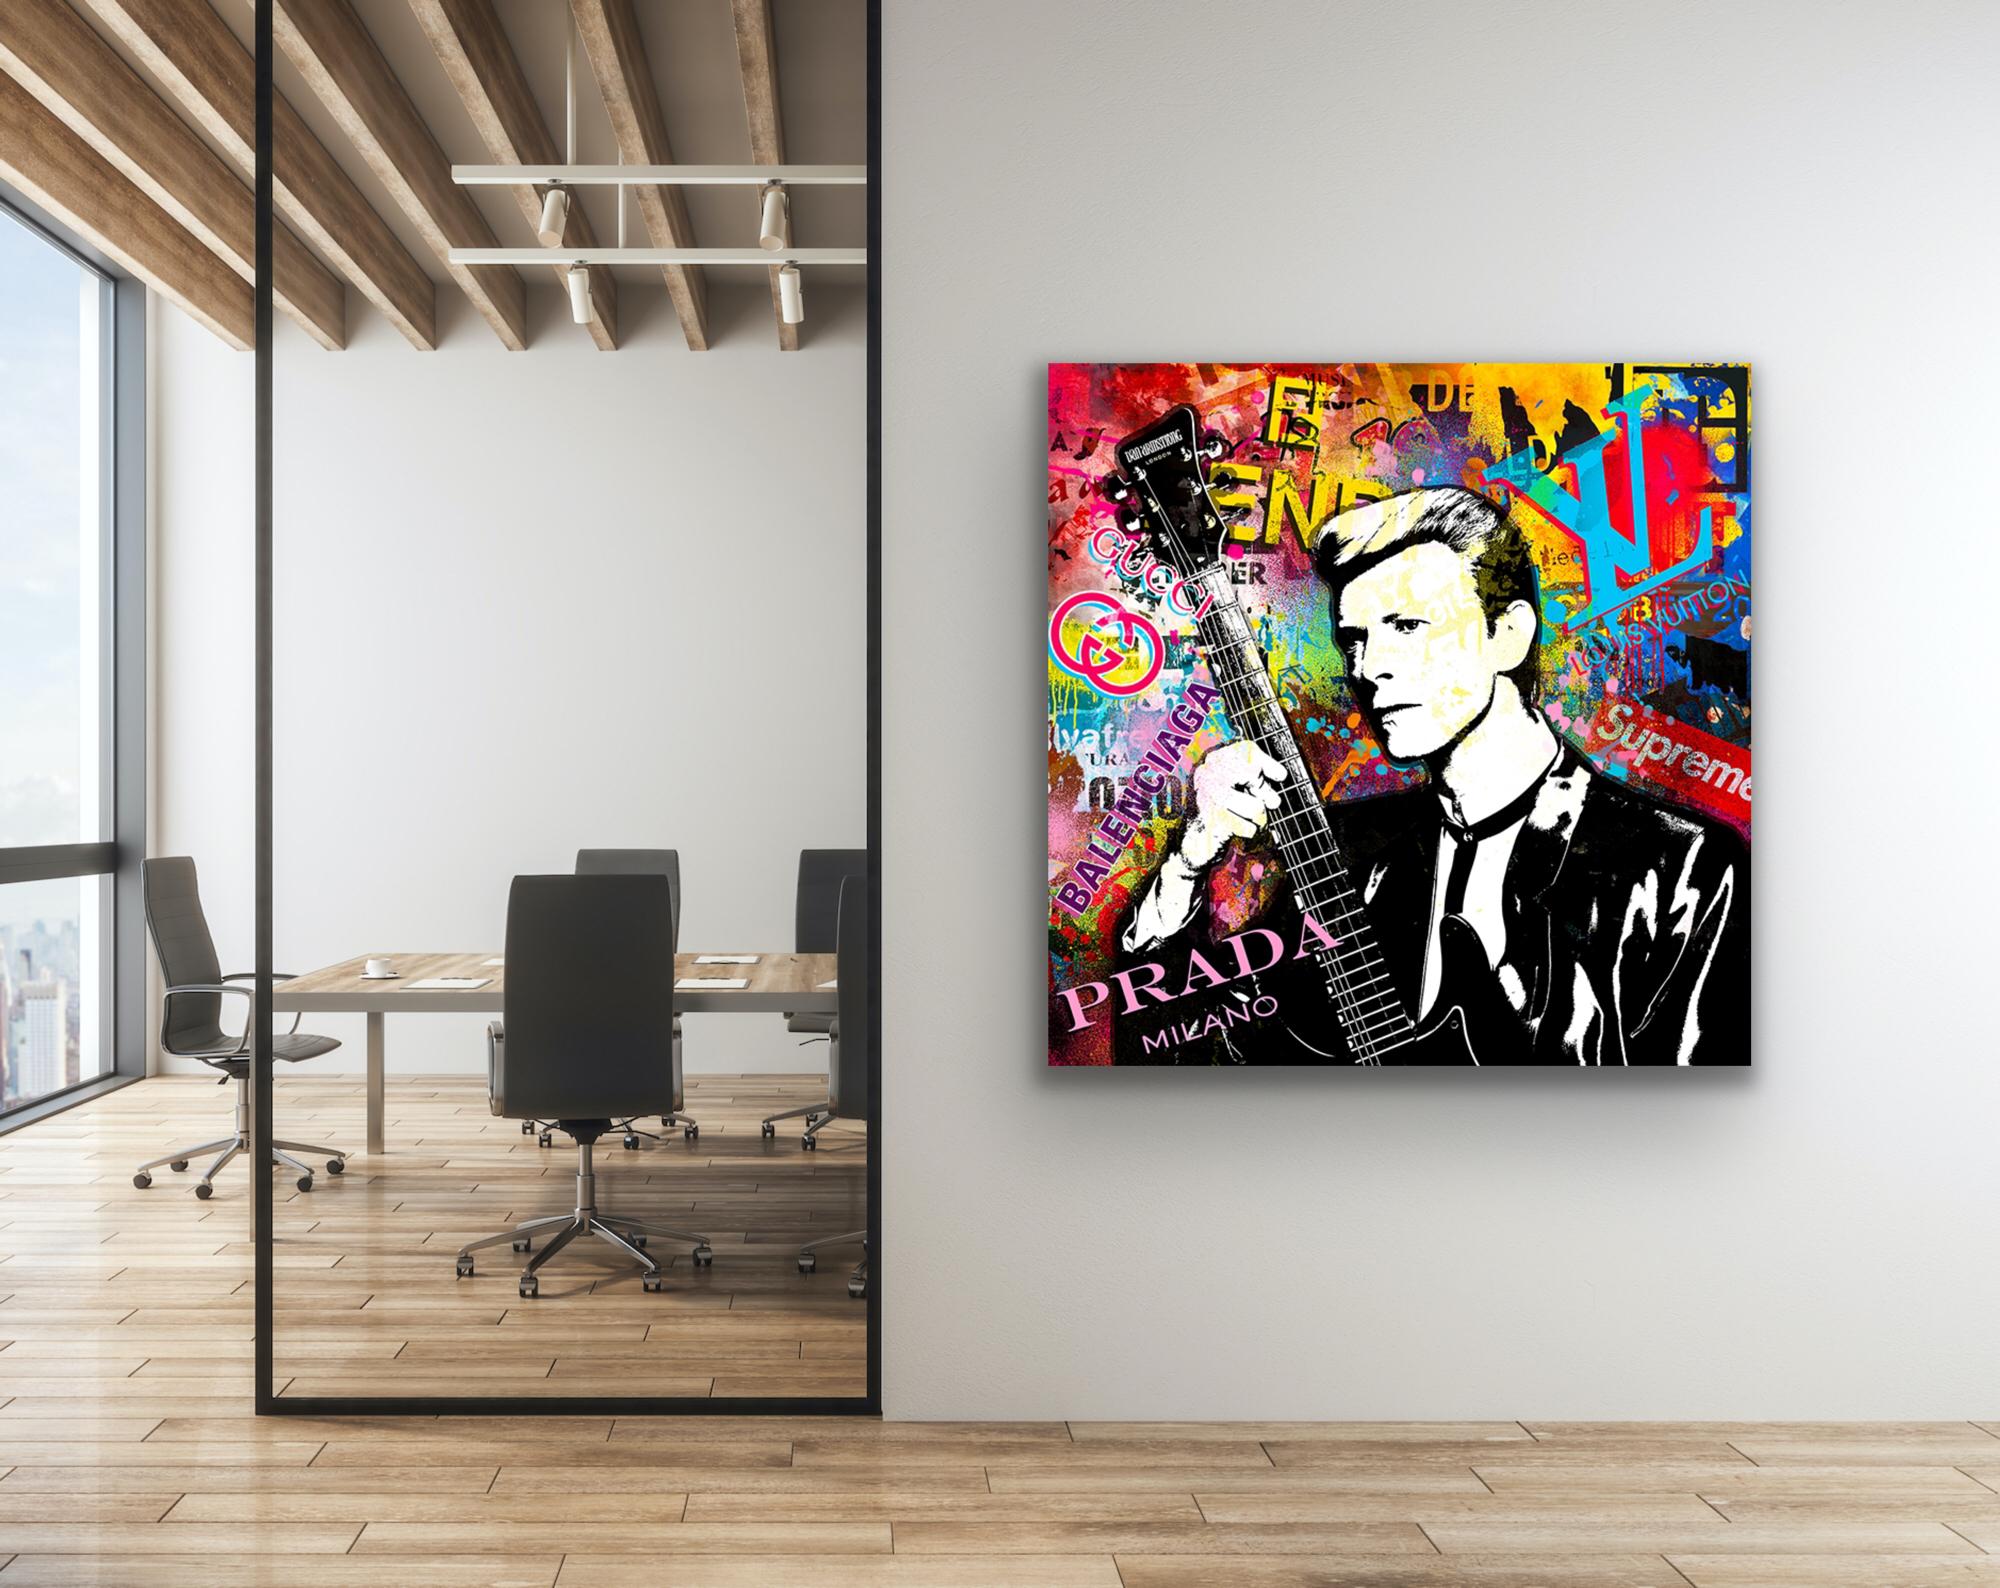 (Bowie) Wishful Mysteries, Colourful Pop Art Painting, Contemporary Portraiture - Black Portrait Painting by Agent X